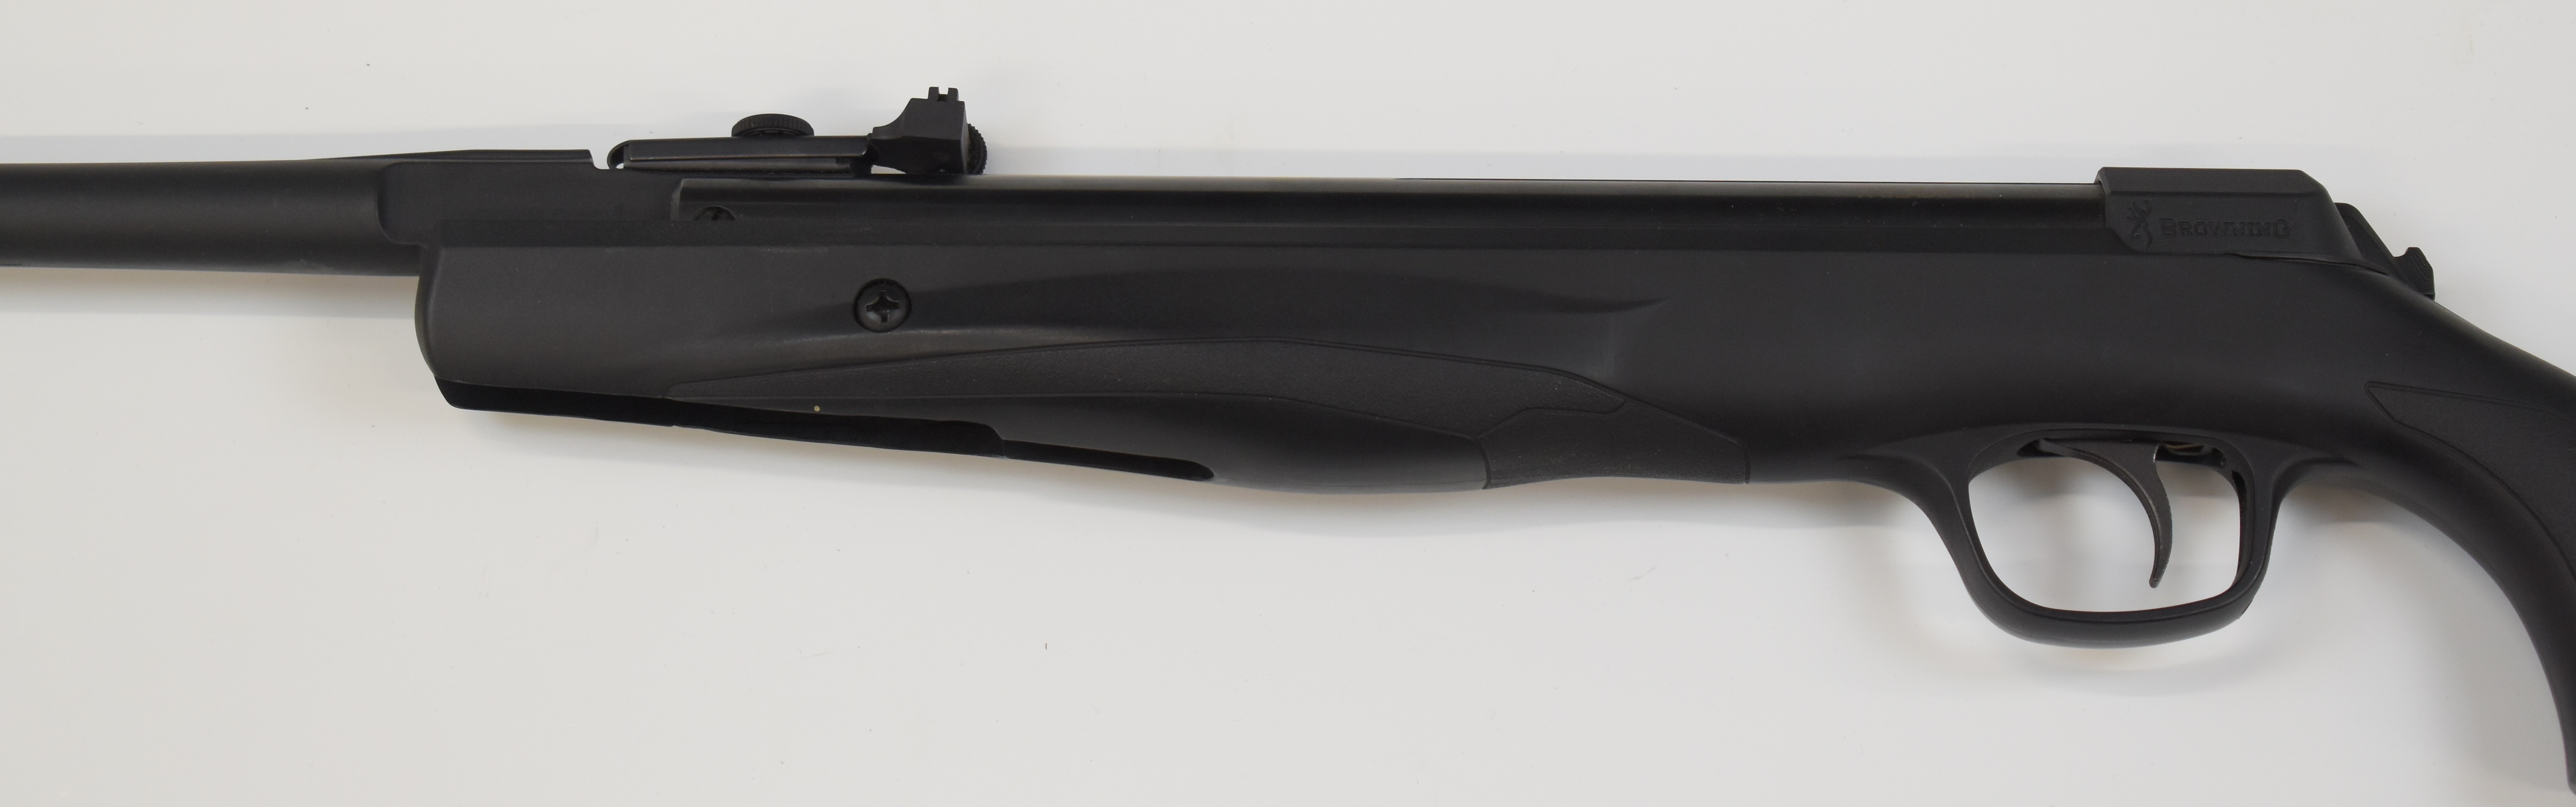 Browning X-Blade II .22 air rifle with composite stock, textured semi-pistol grip and forend and - Image 8 of 10